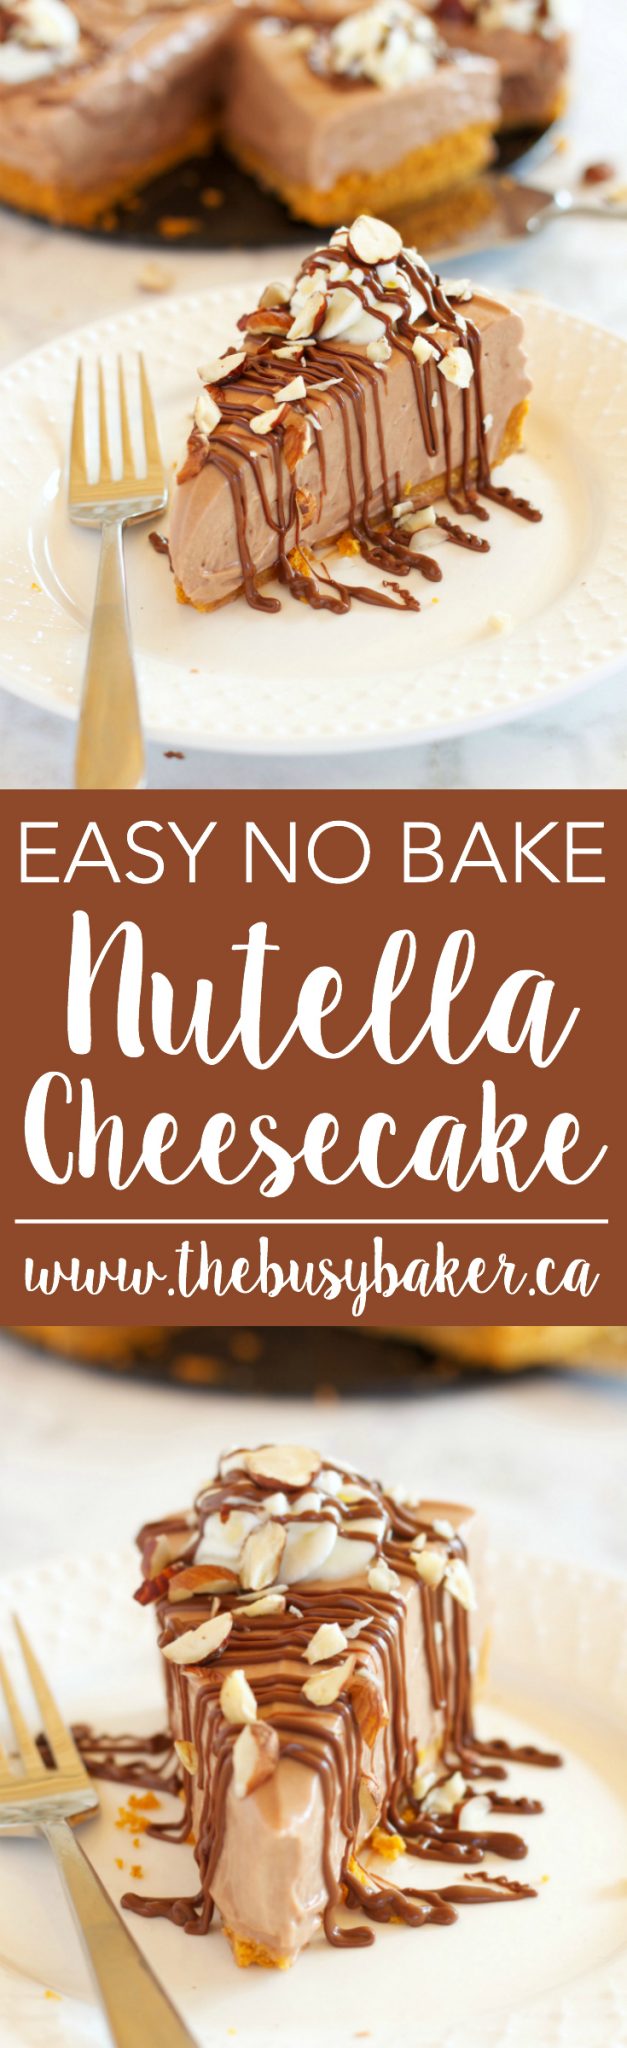 This Easy No Bake Nutella Cheesecake is the perfect easy dessert recipe for Nutella lovers! Recipe from thebusybaker.ca! via @busybakerblog